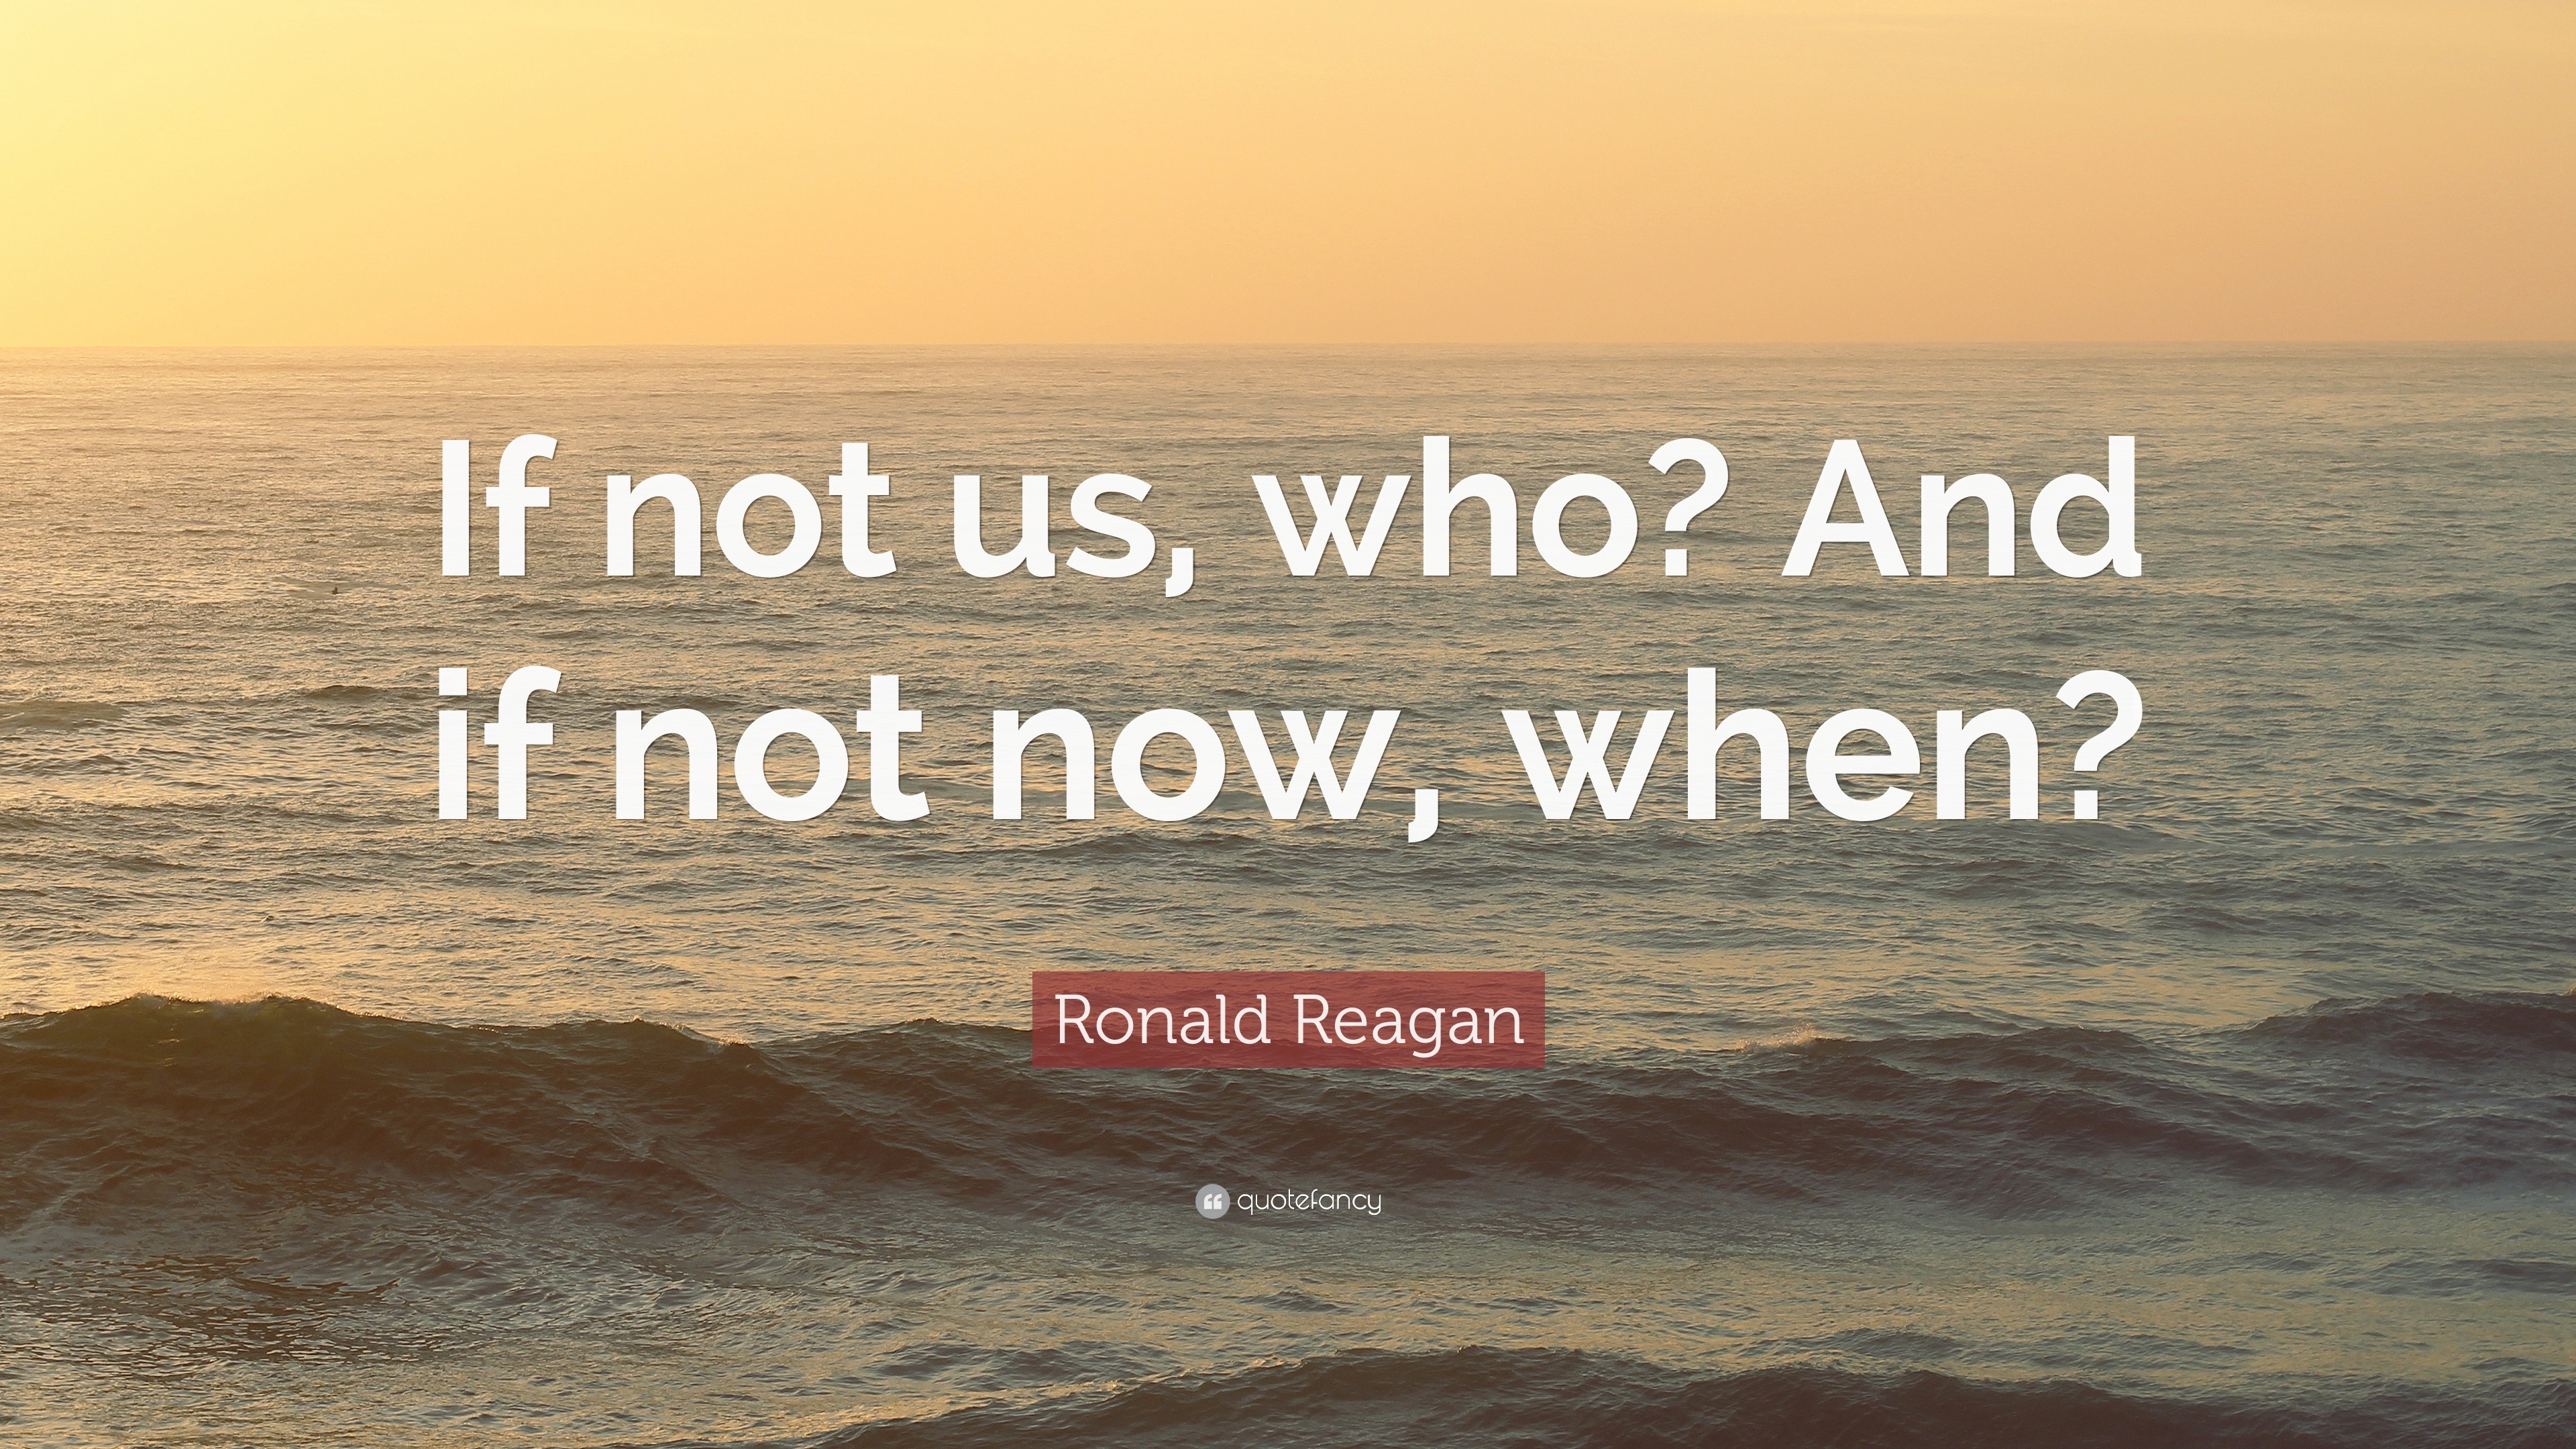 Ronald Reagan Quote: "If not us, who? And if not now, when?"